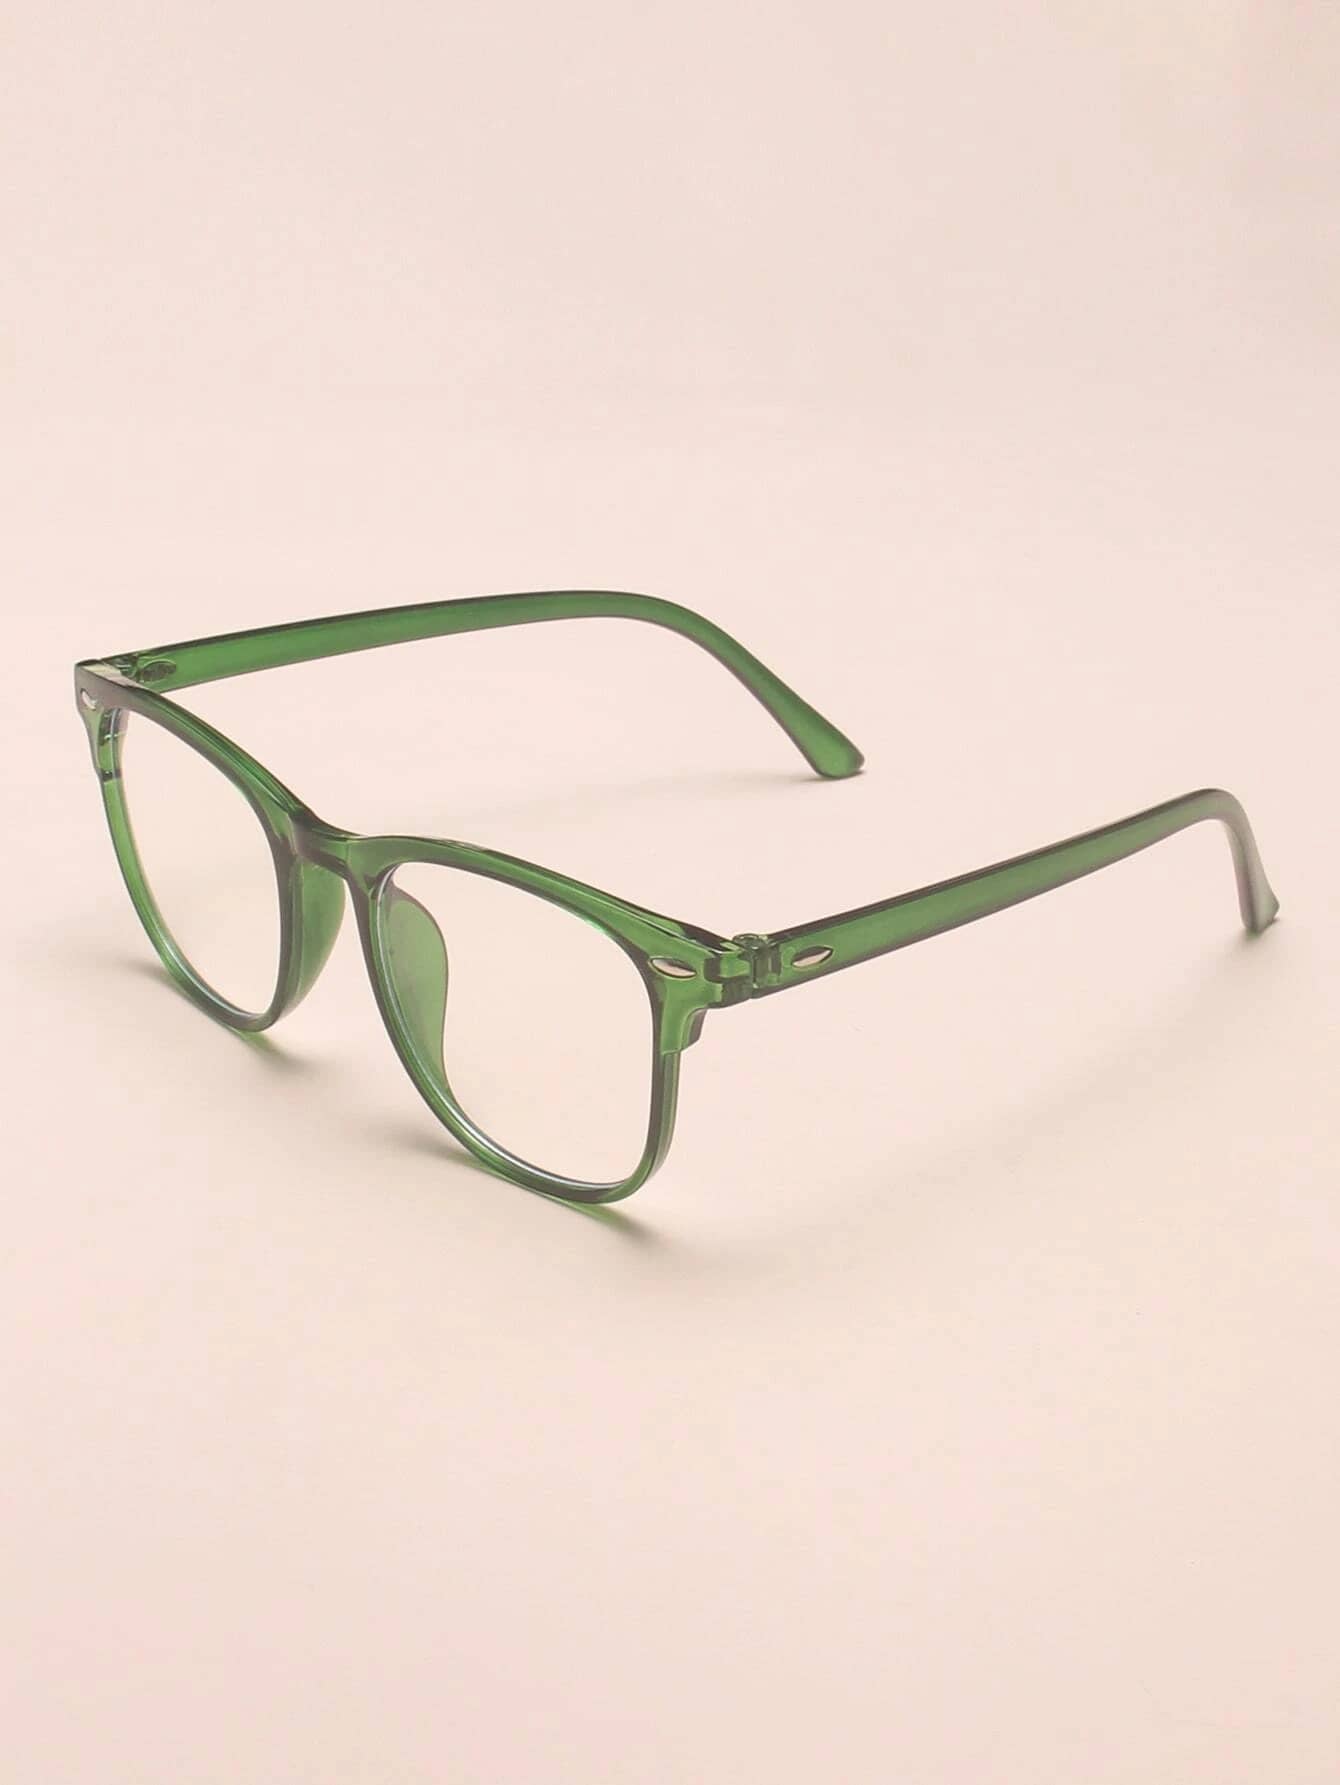 Clear Acrylic Frame Glasses - Green - FD ⚡